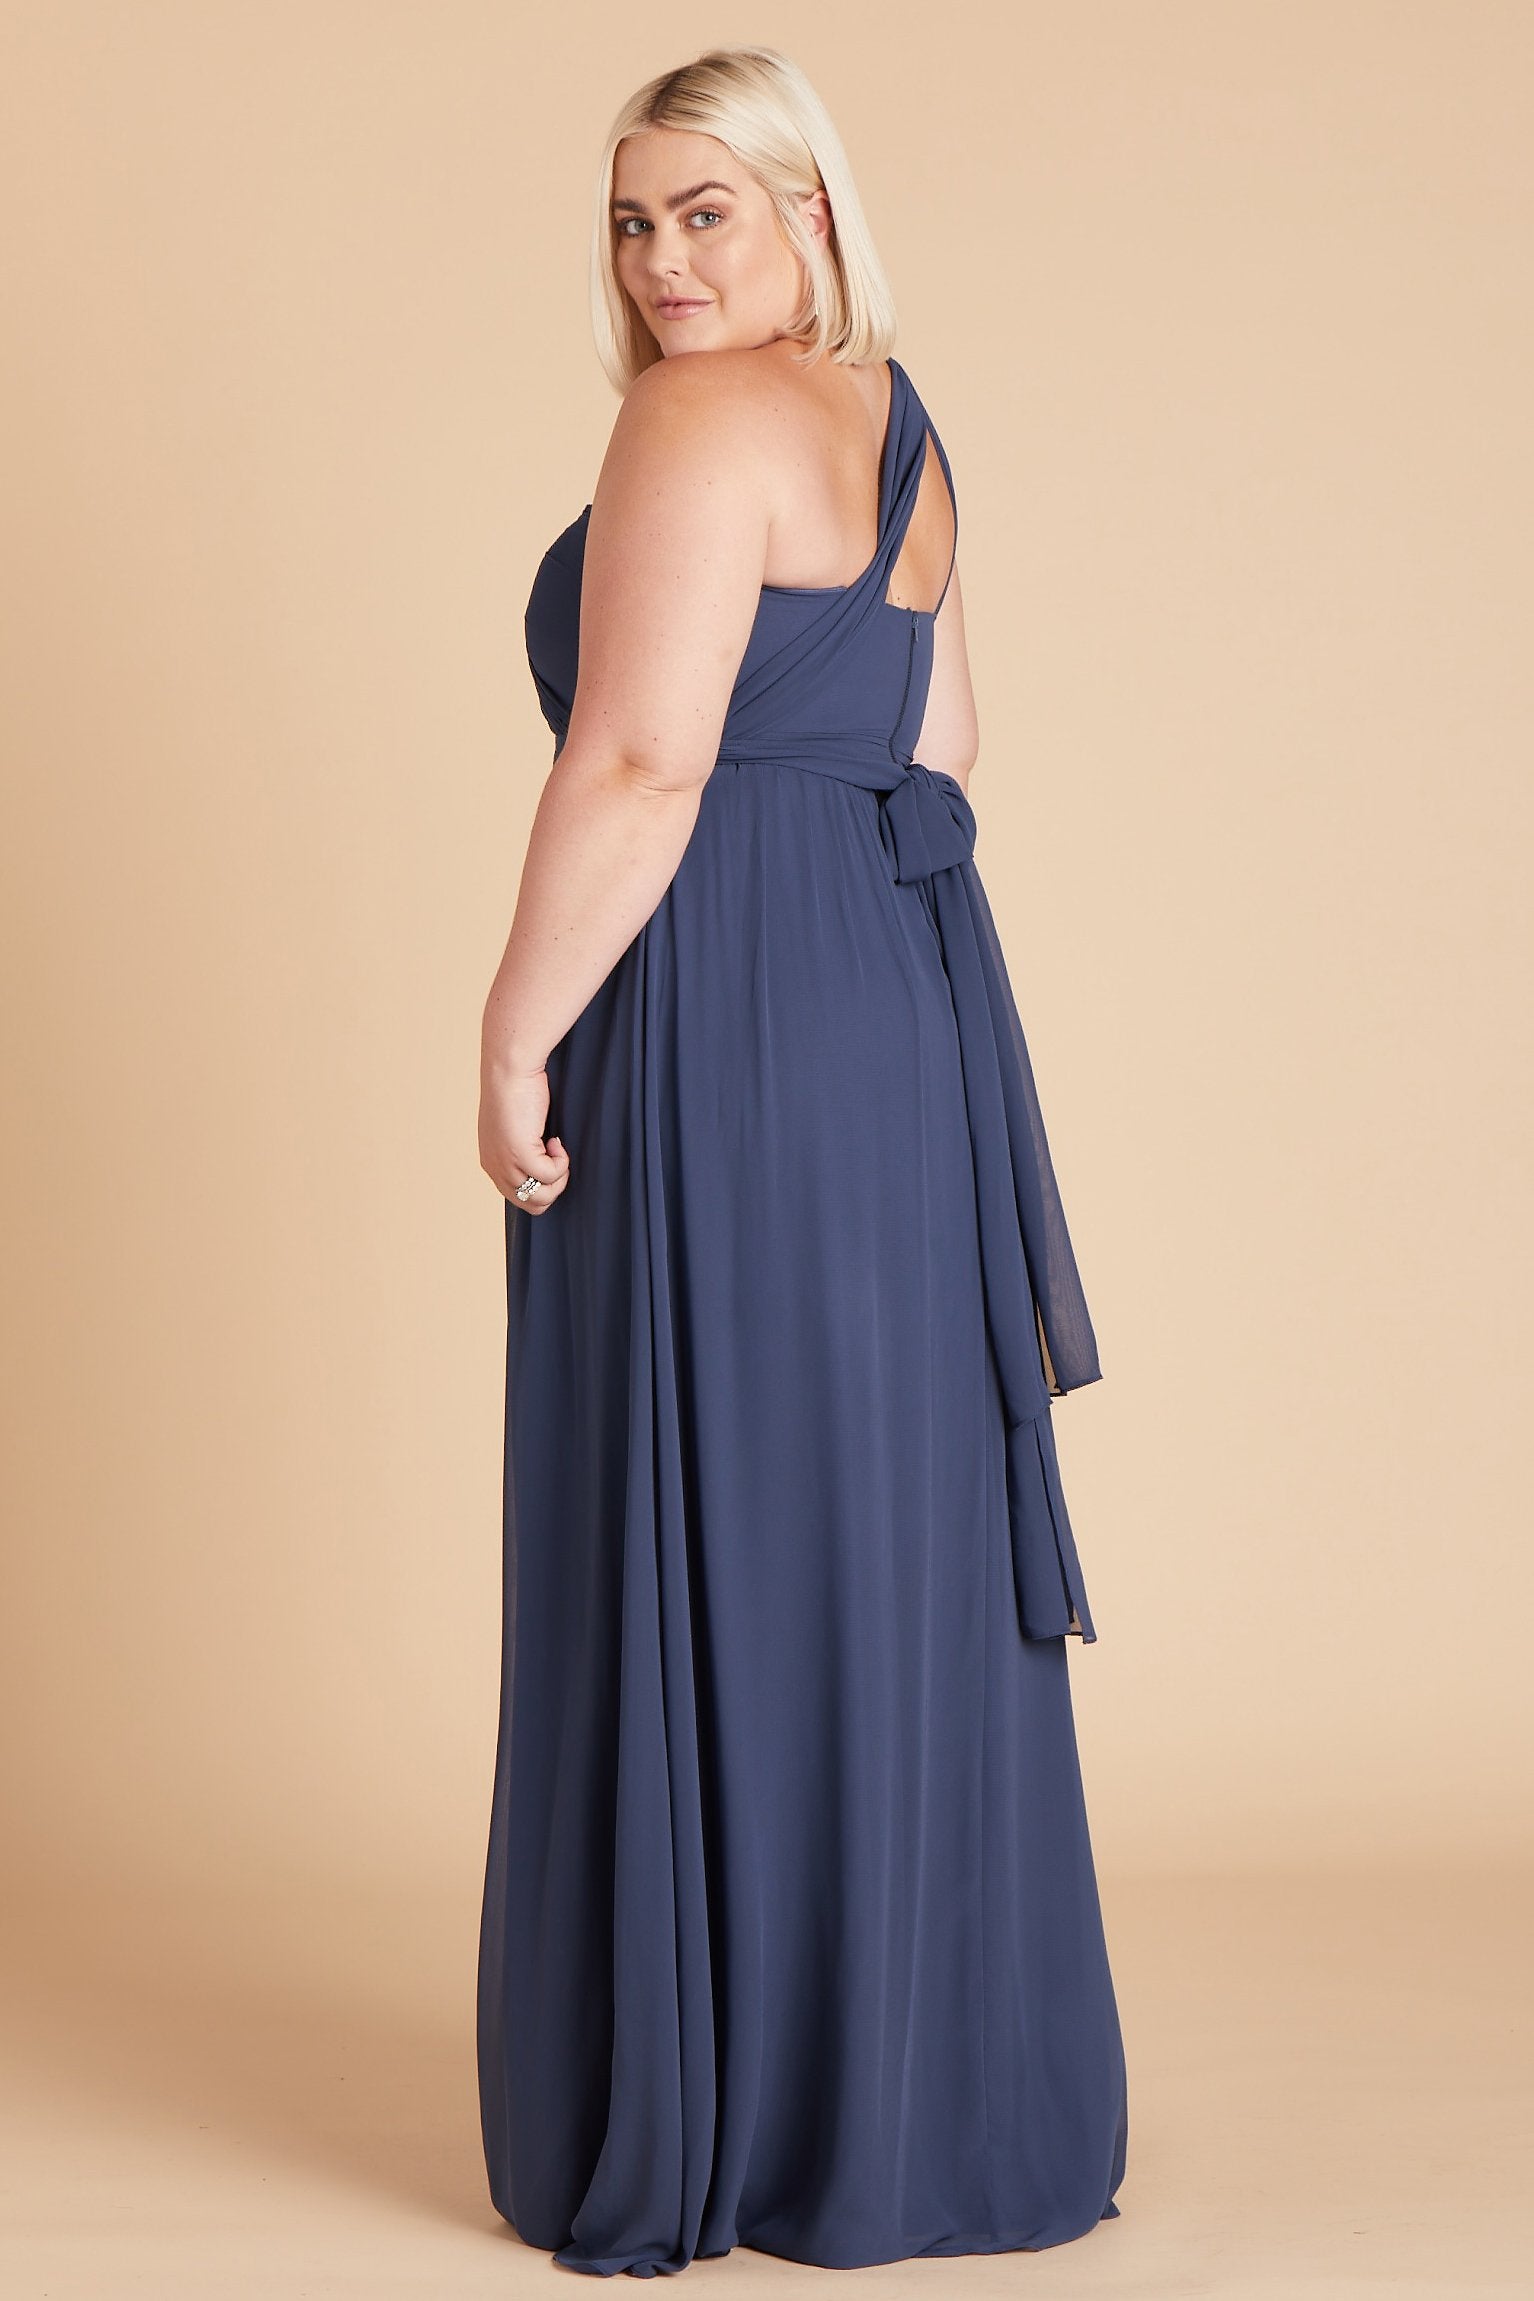 Grace convertible plus size bridesmaid dress in slate blue chiffon by Birdy Grey, side view